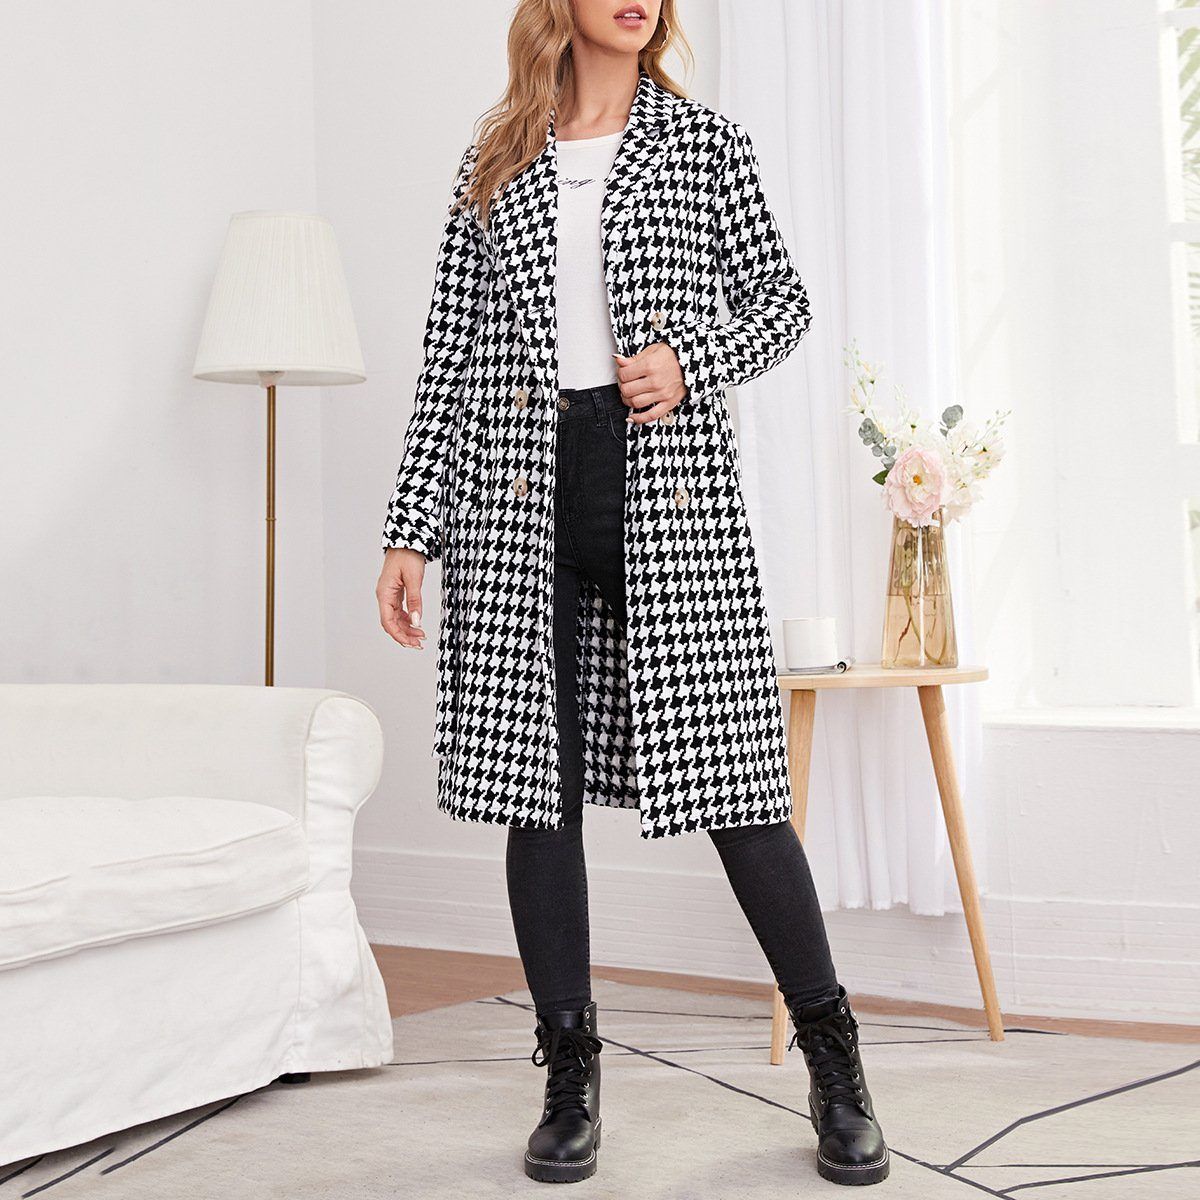 HOUNDSTOOTH BUCKLE LAPEL COLLAR FASHION COAT, Sizes XSmall - Large